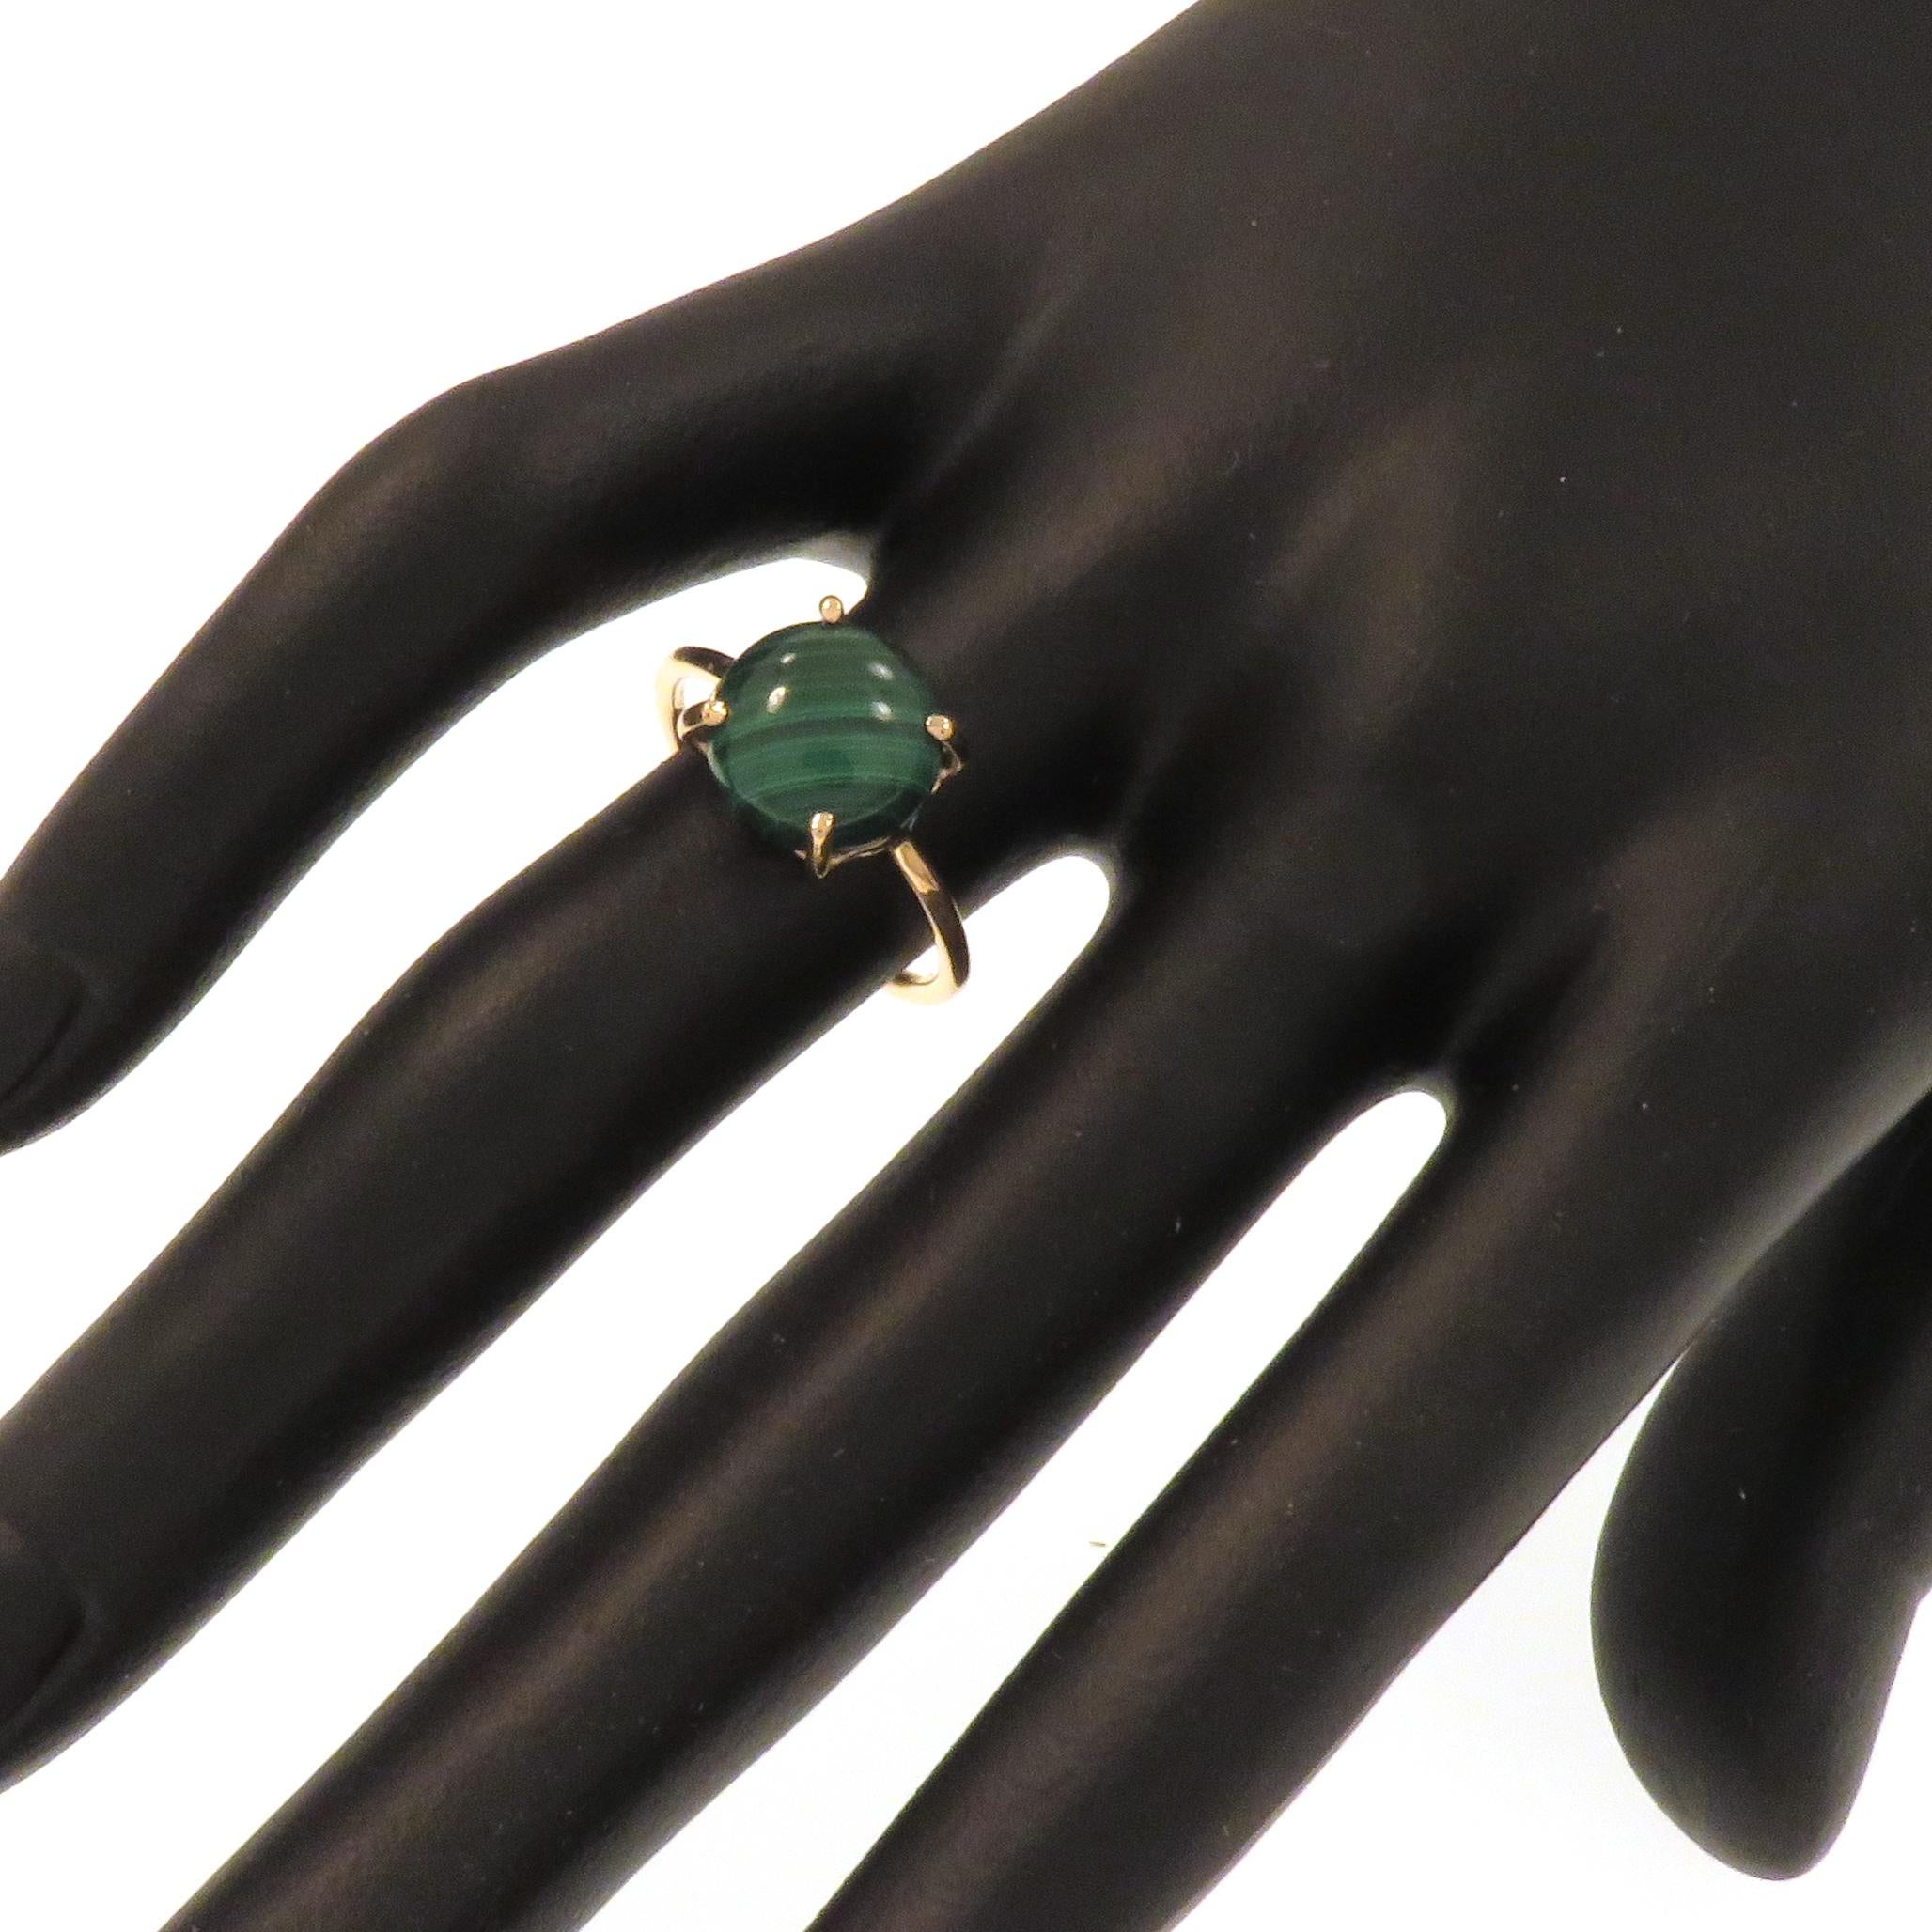 Cabochon cut malachite featured in a contemporary ring crafted in 9 karat rose gold. The size of the gemstone is 10x10 mm / 0.393x0.393 inches. US finger size is 6 , French size 52, Italian size 12, resizable to the customer's size before shipment.